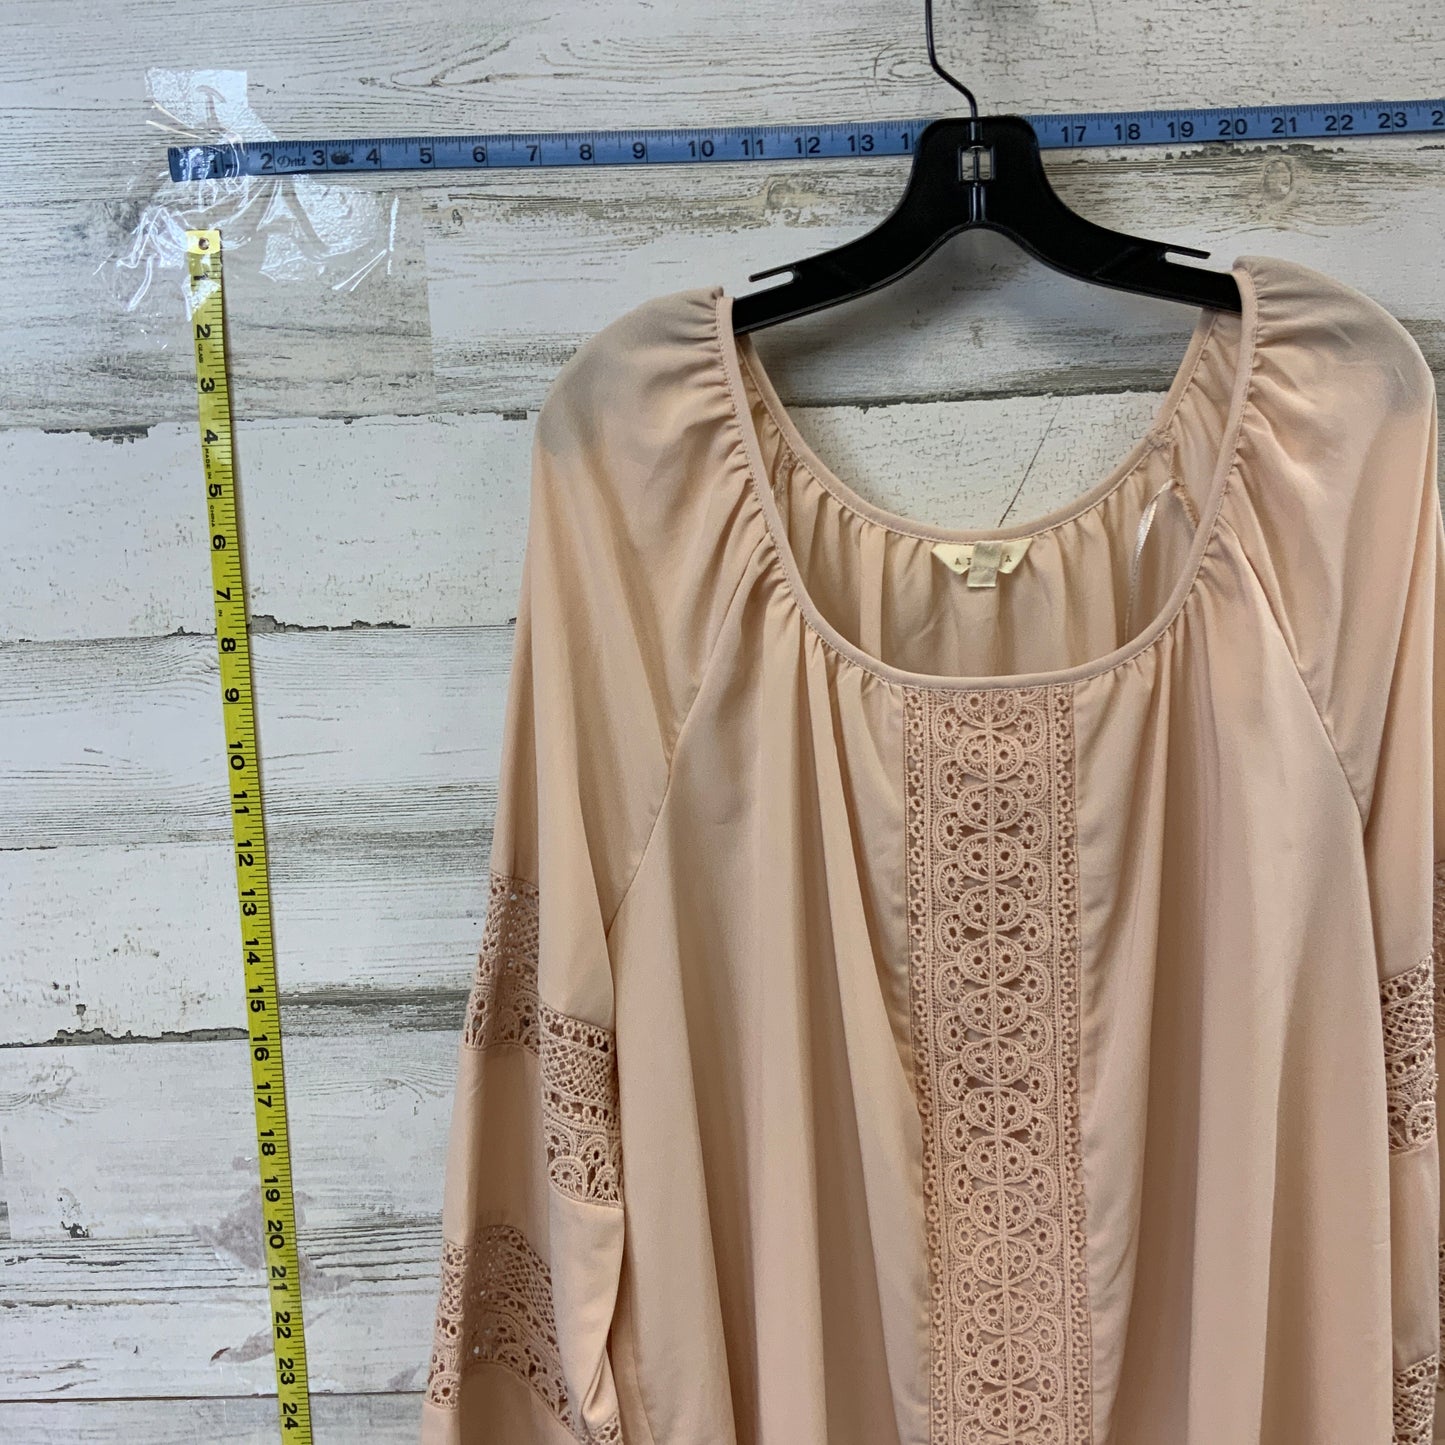 Blouse Long Sleeve By A DIVA Size: 2x